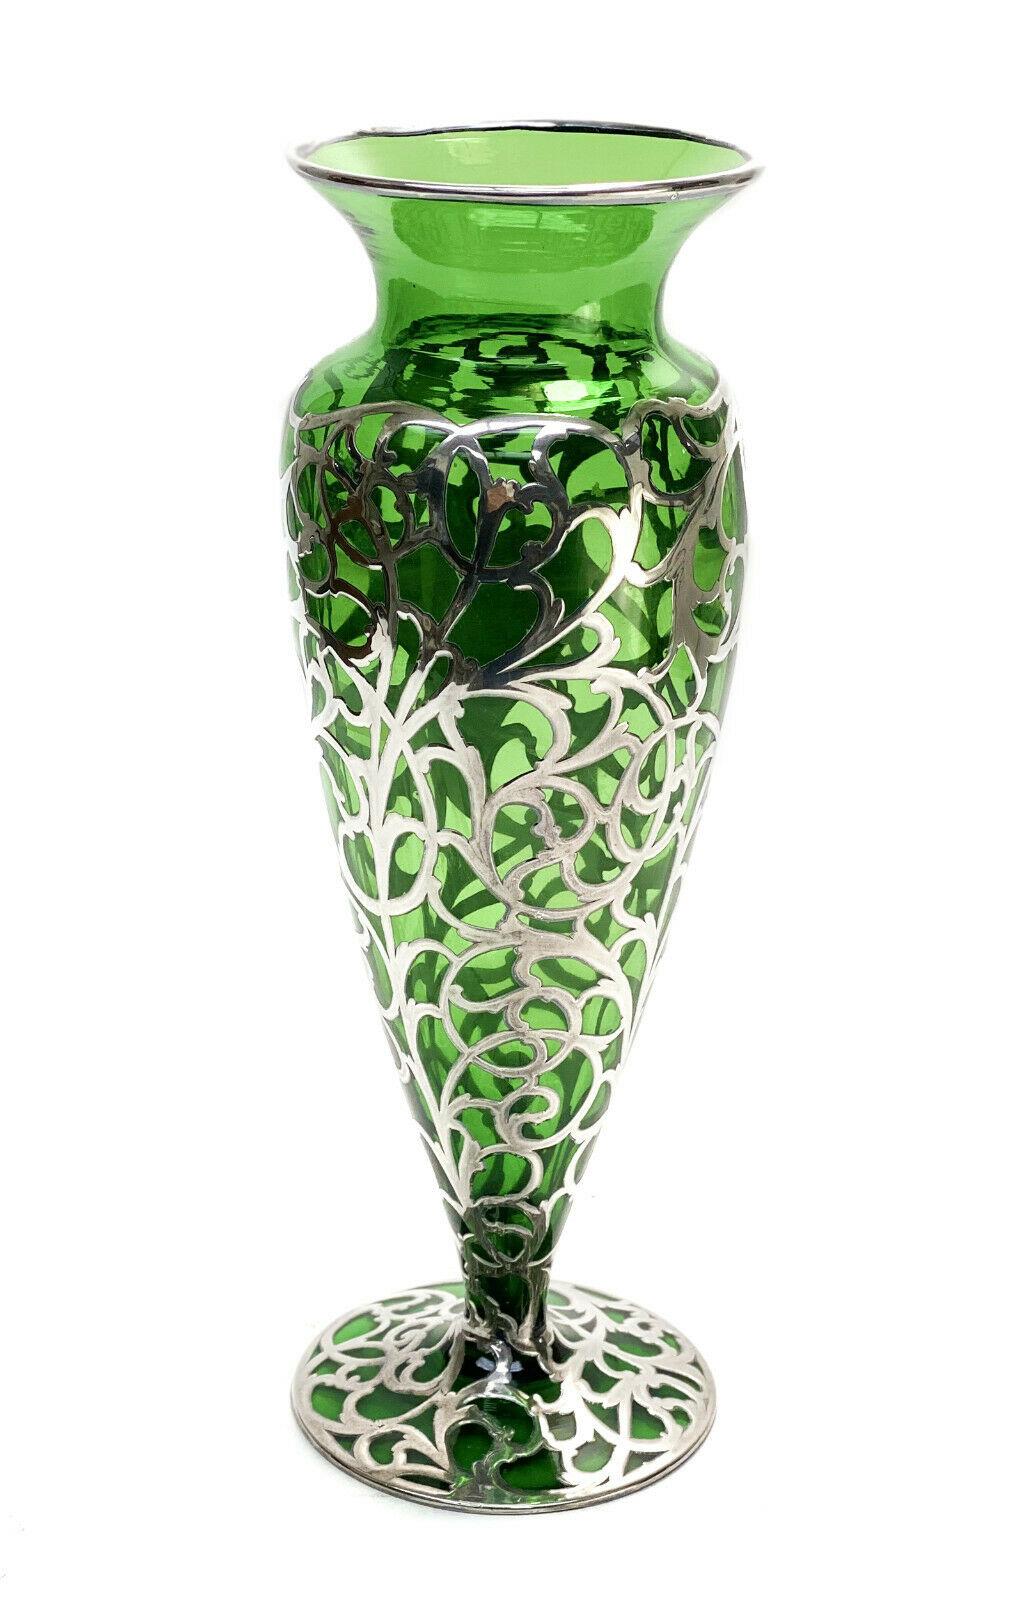 American green glass silver overlay footed 12 Inch Vase, circa 1900

Green hue to the glass with foliate scroll designs throughout. Monogrammed 